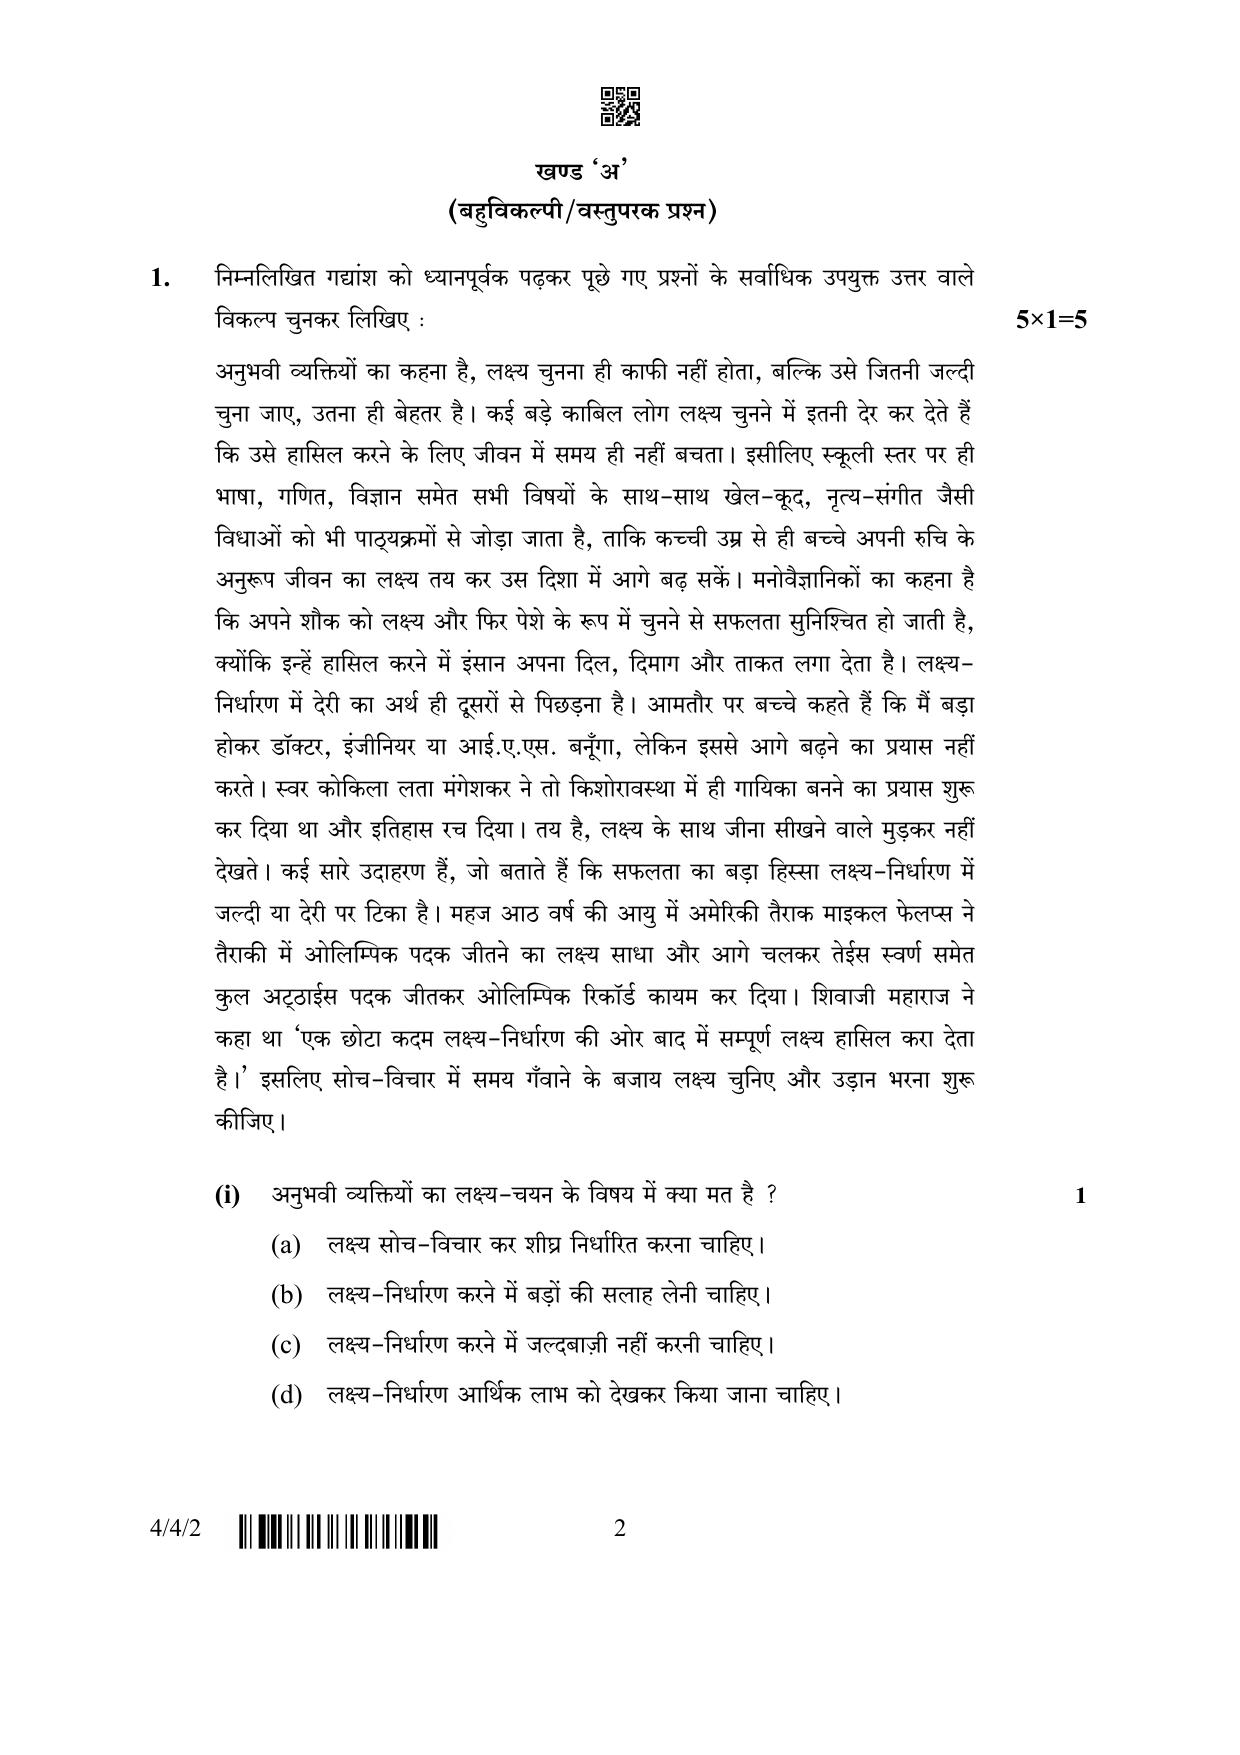 CBSE Class 10 4-4-2 Hindi B 2023 Question Paper - Page 2